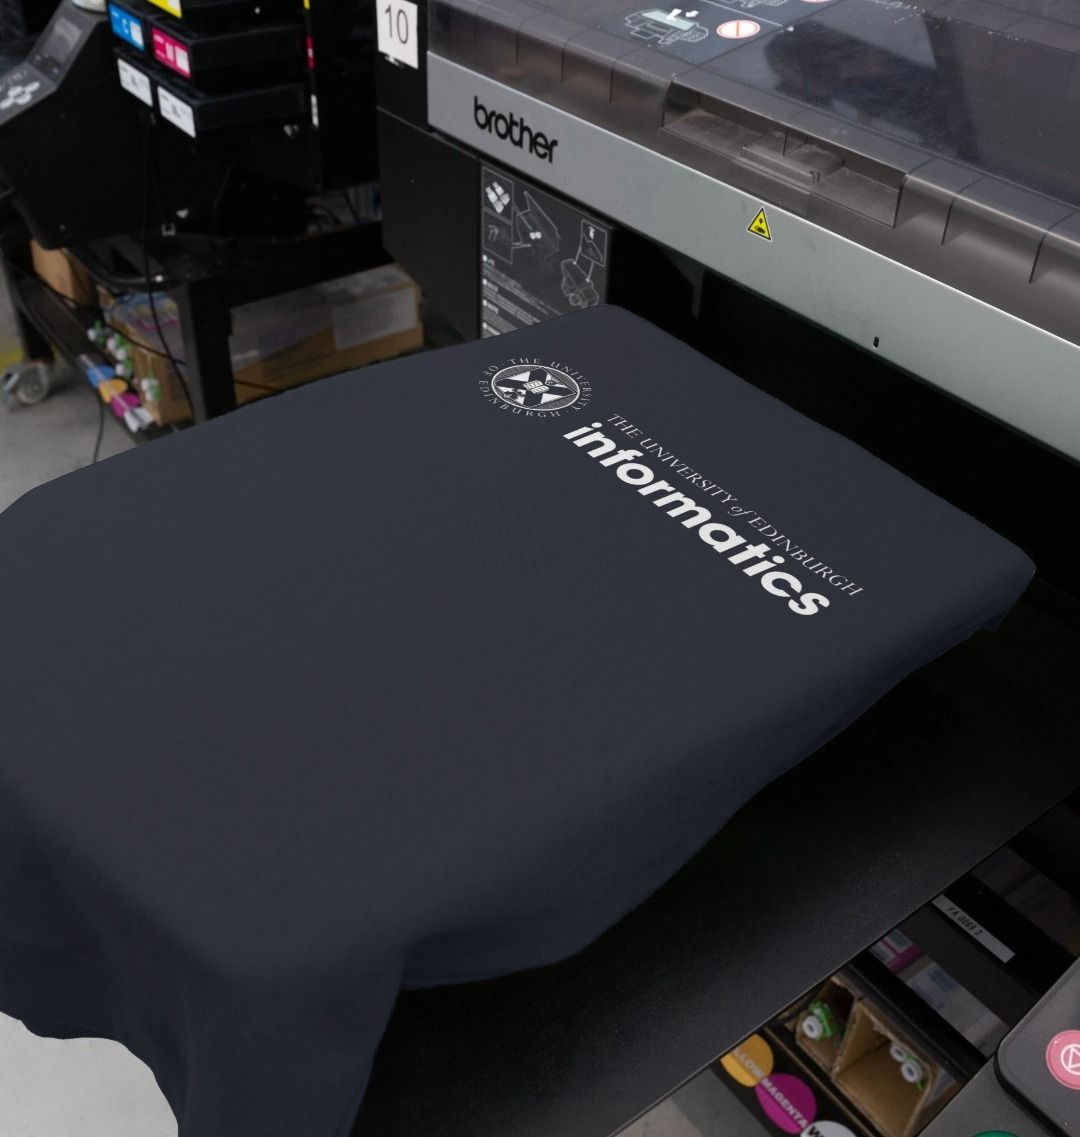 Our School of Informatics Sweatshirt being printed by our print on demand partner, teemill.